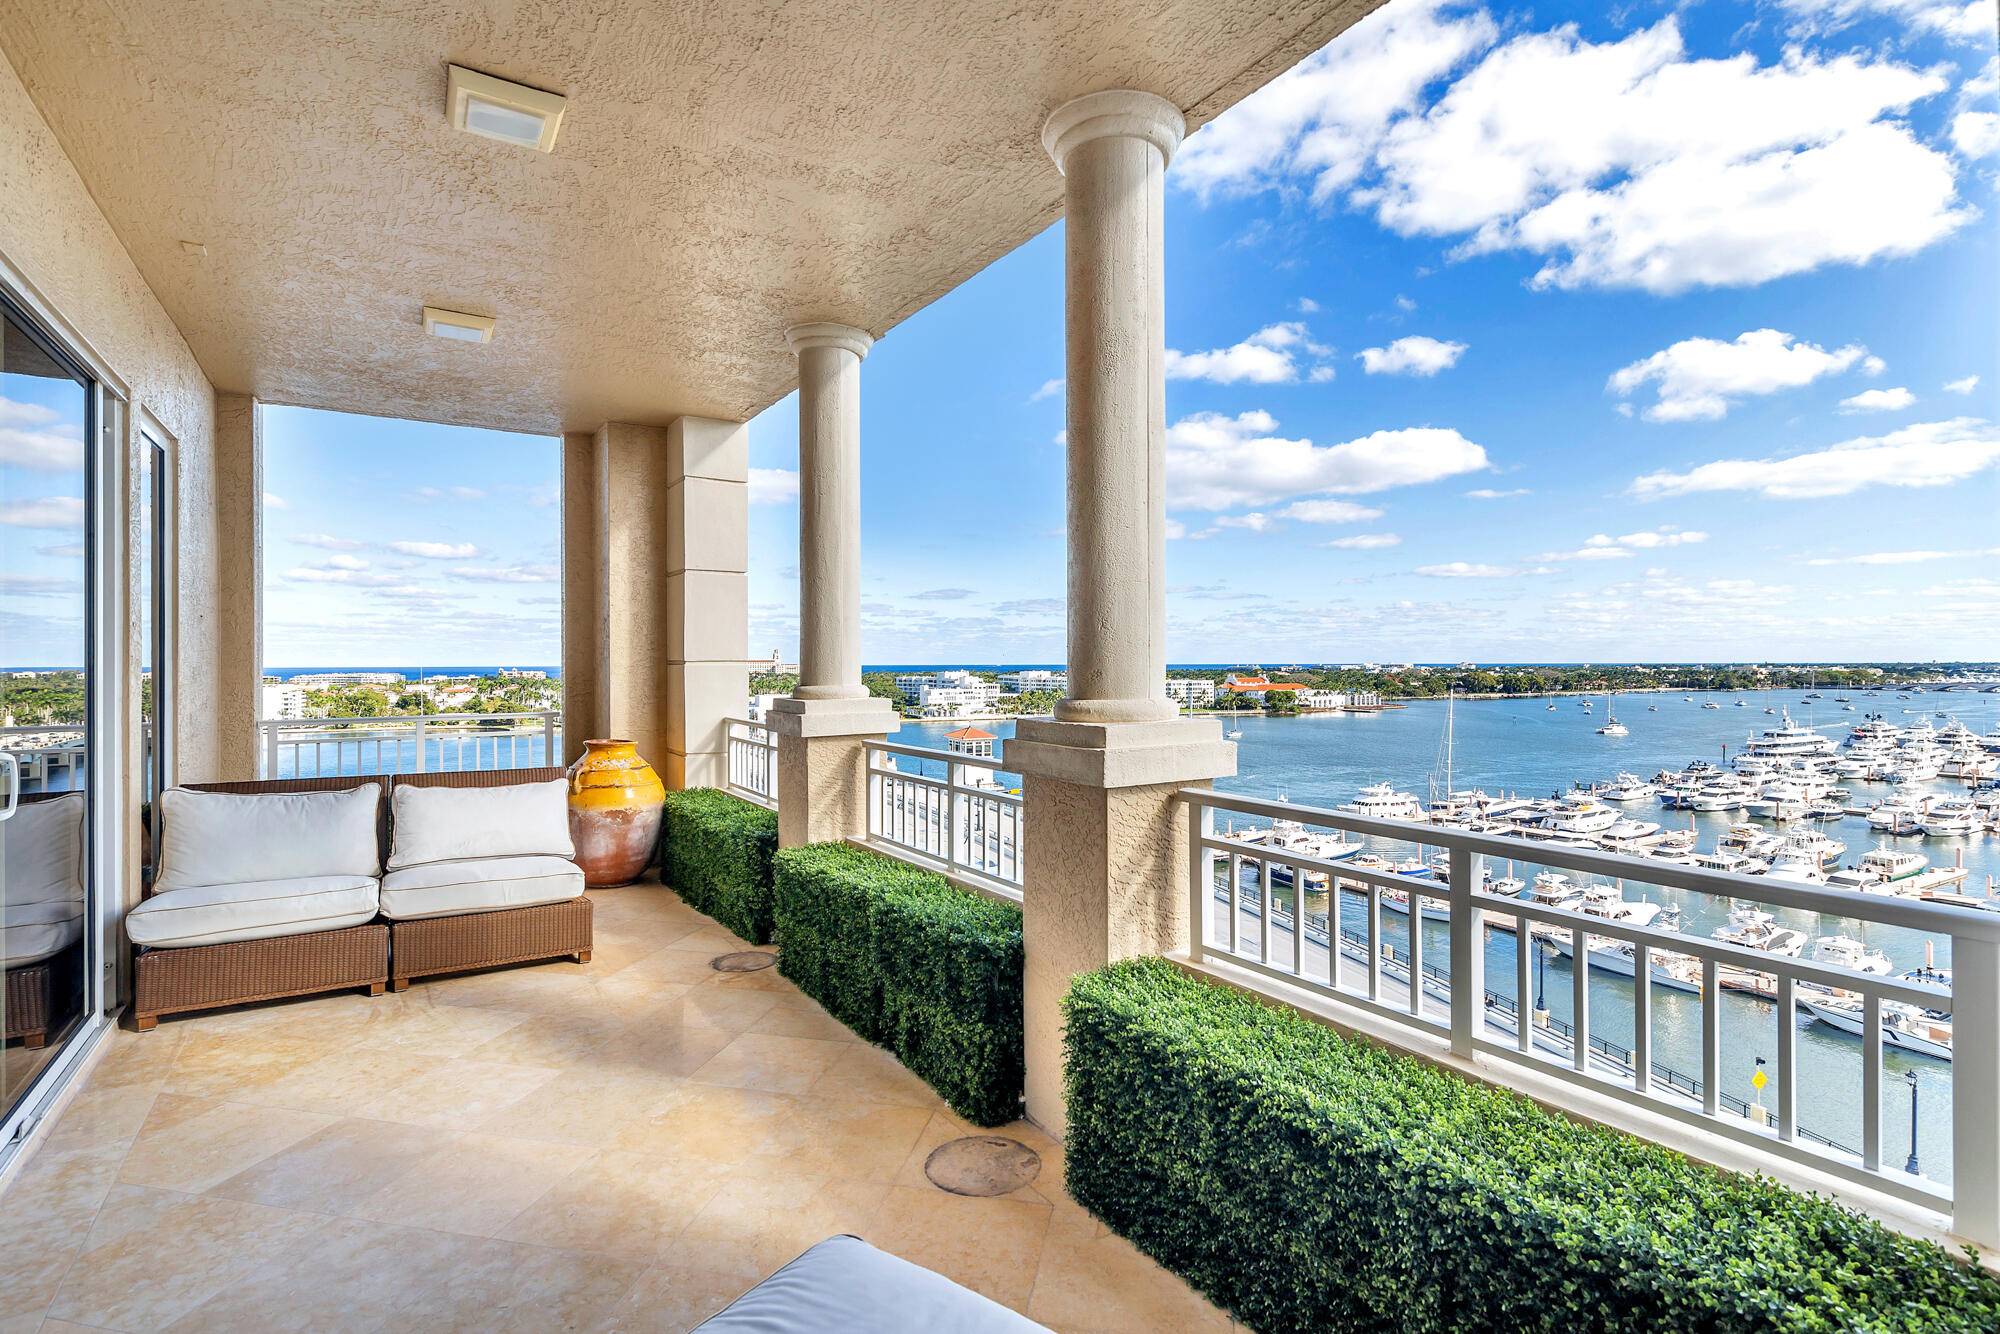 Welcome to the largest condo with the best views in One Watermark Place on the market.